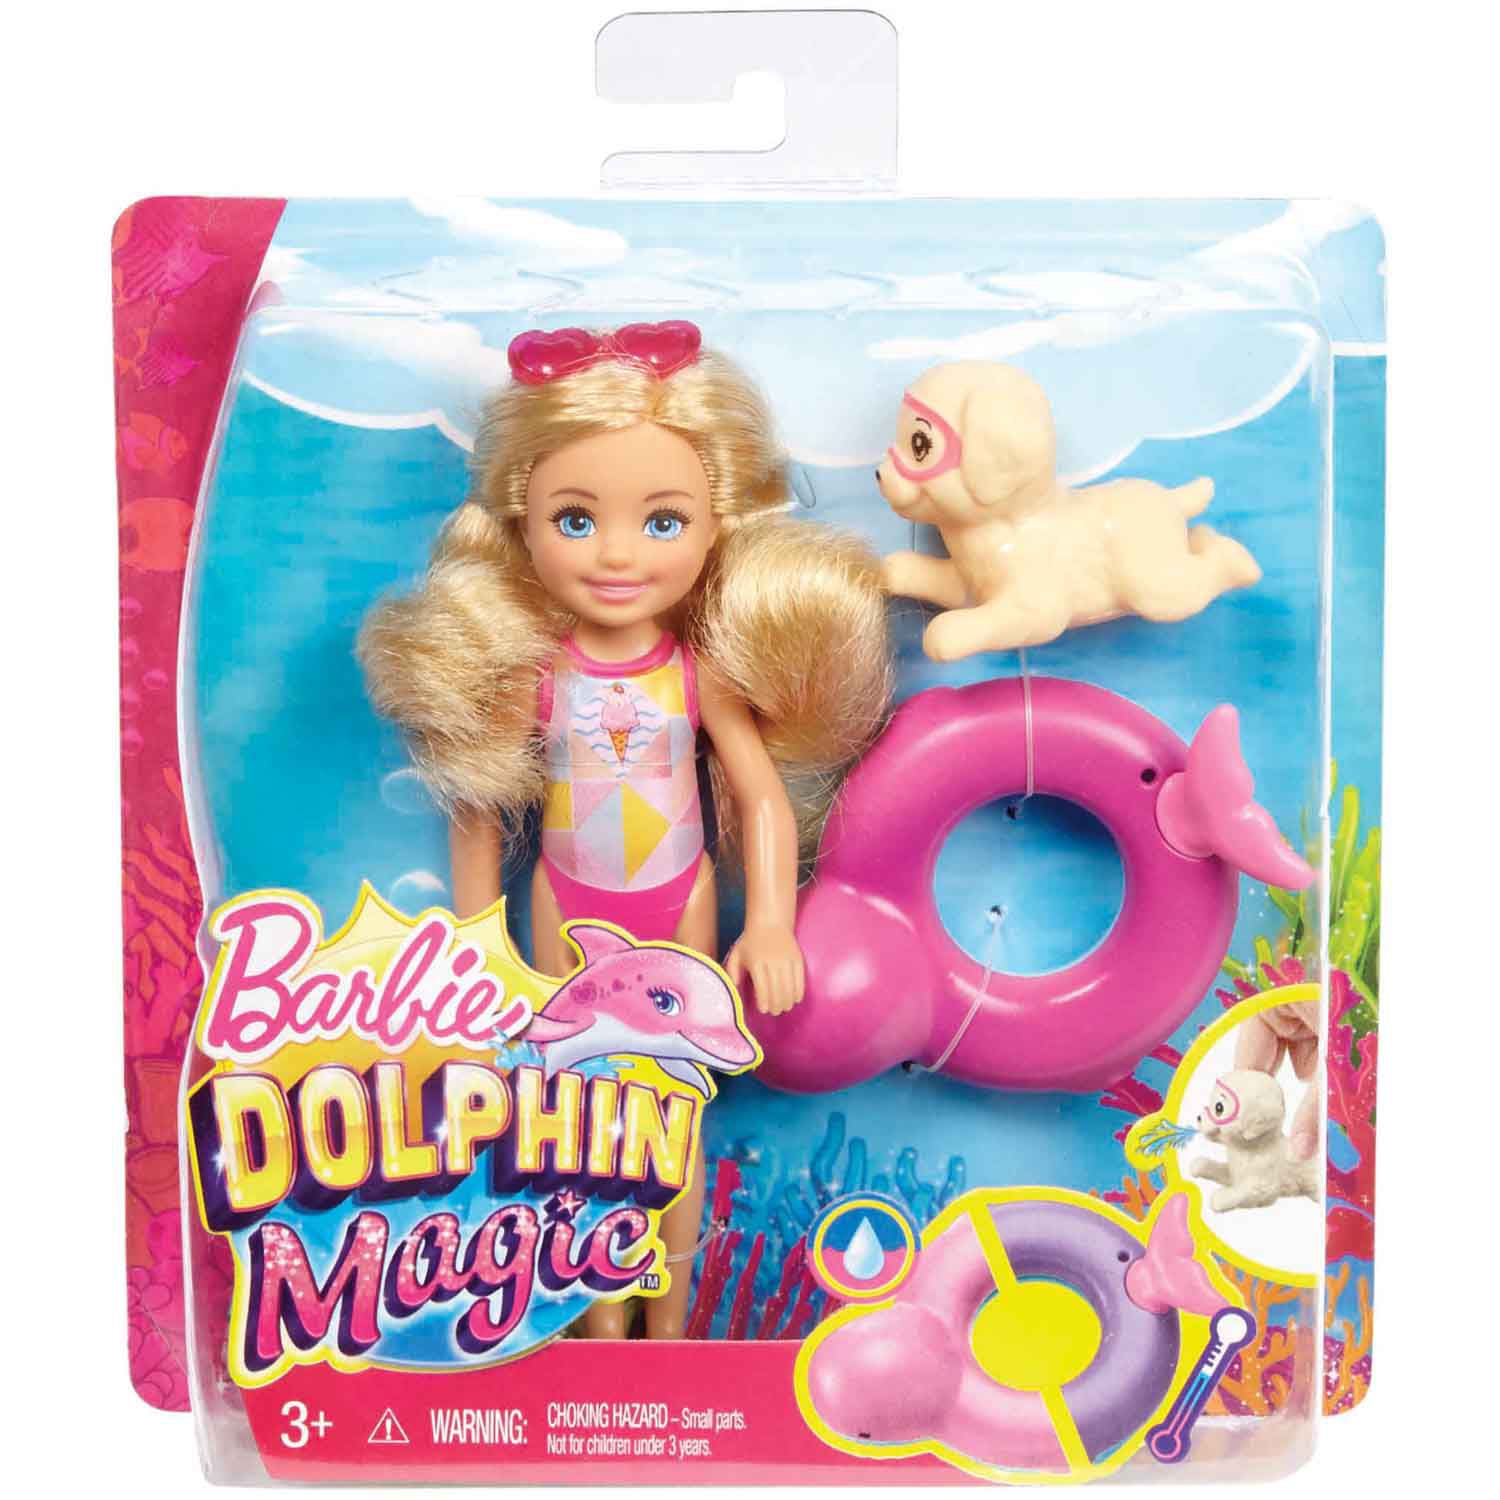 barbie and the dolphin